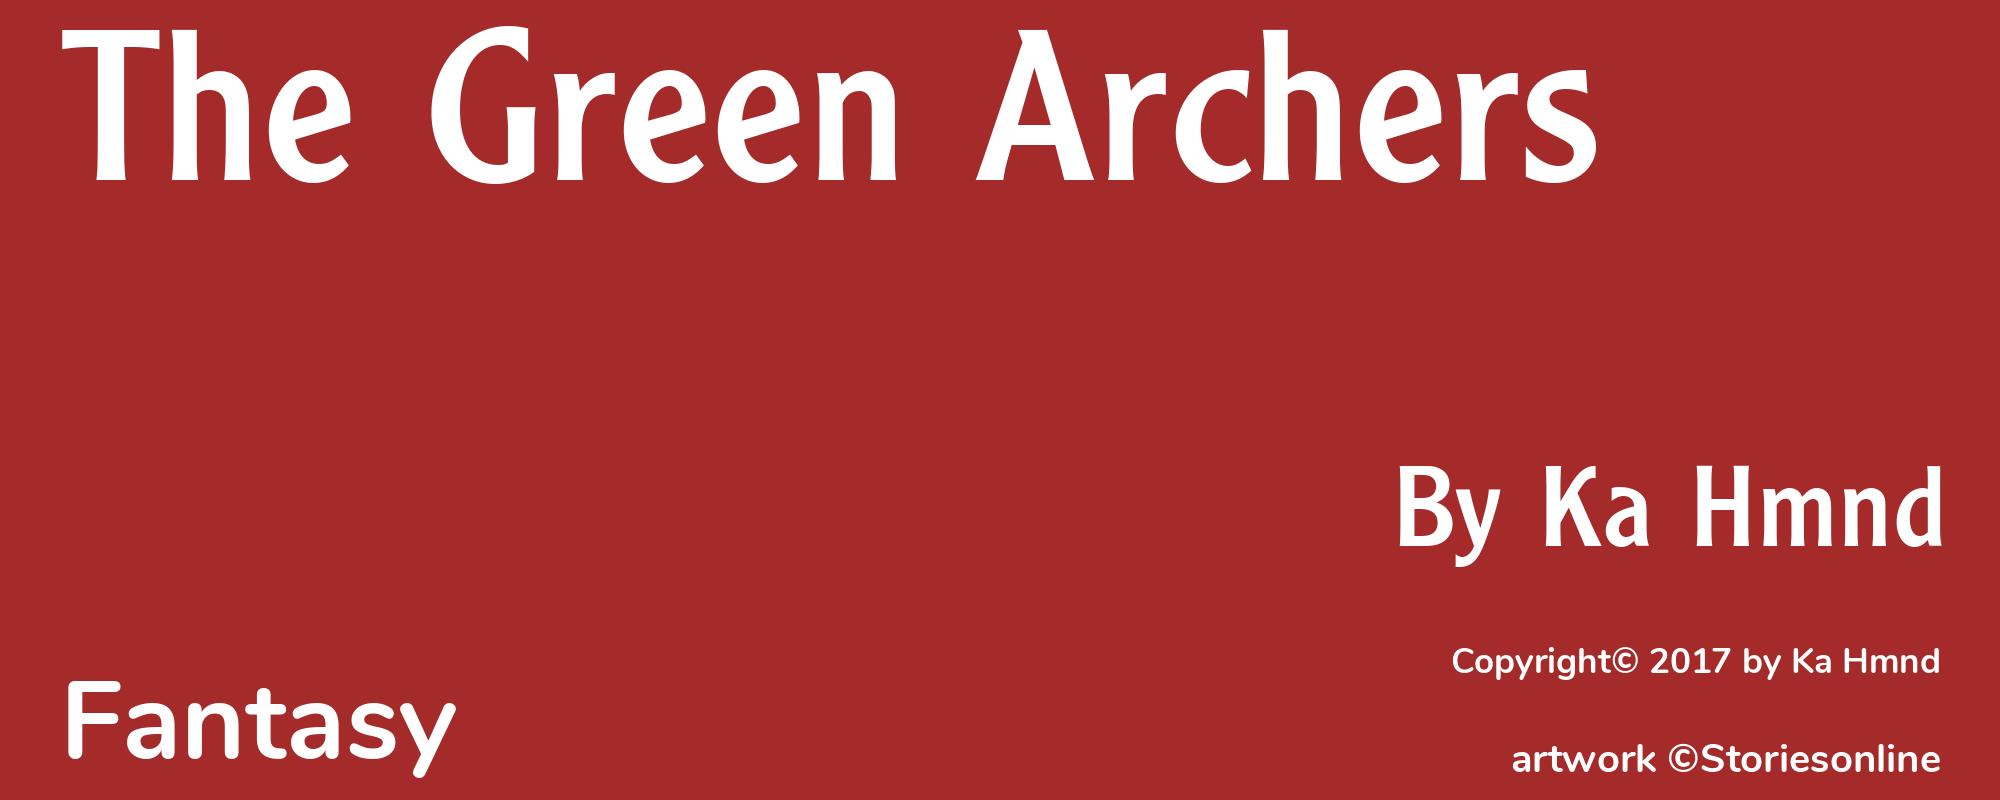 The Green Archers - Cover